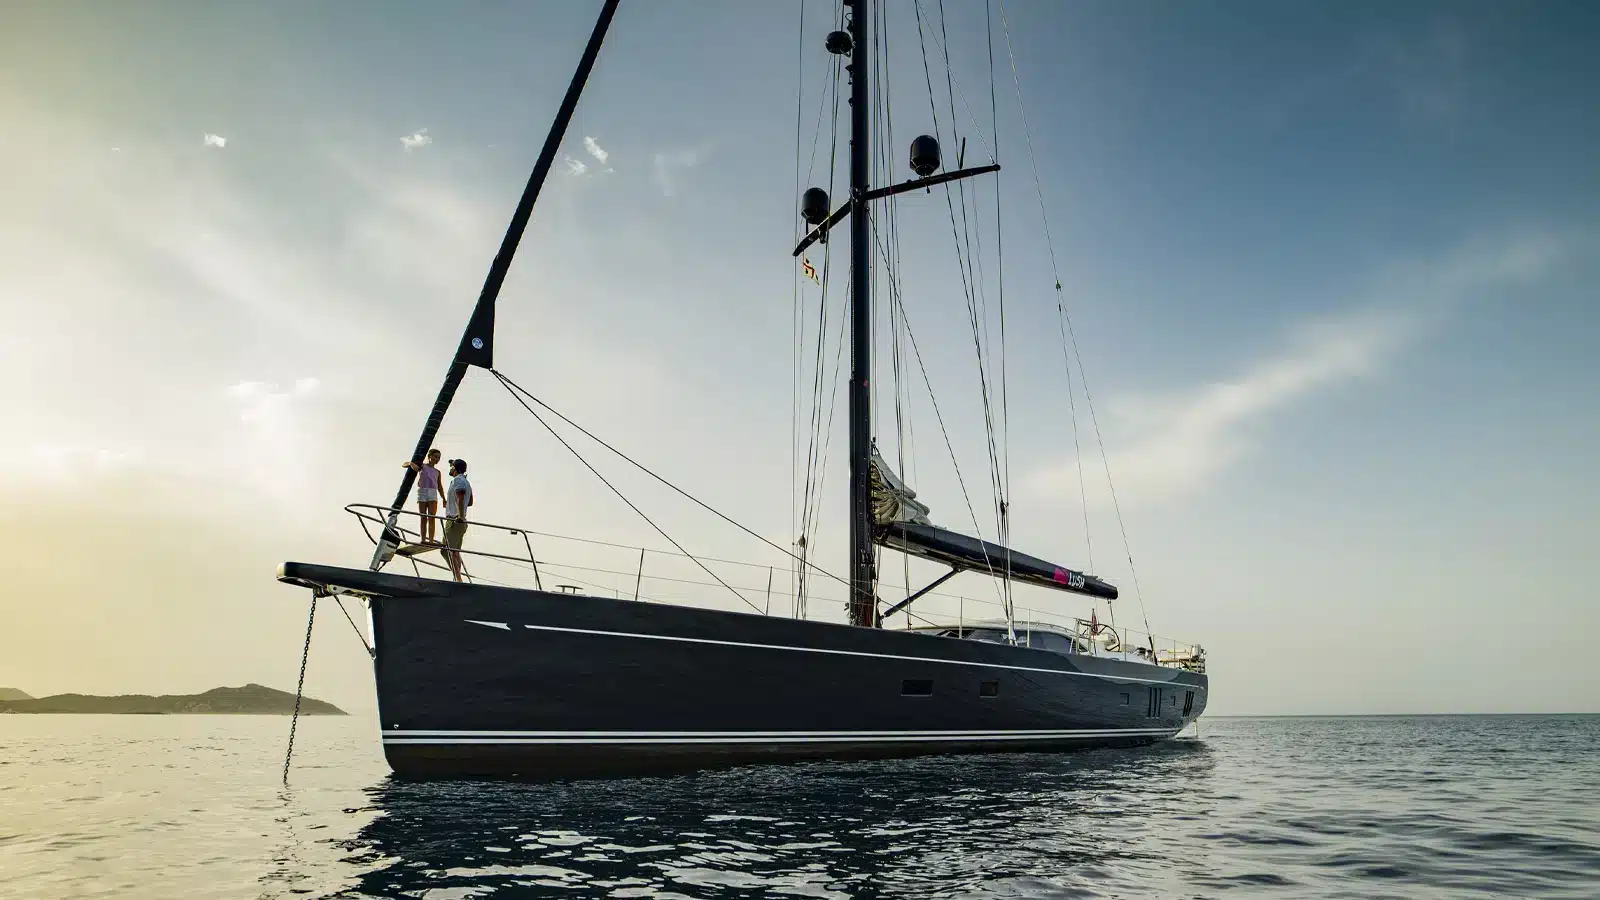 Oyster Yachts returns to profit after significant year of growth